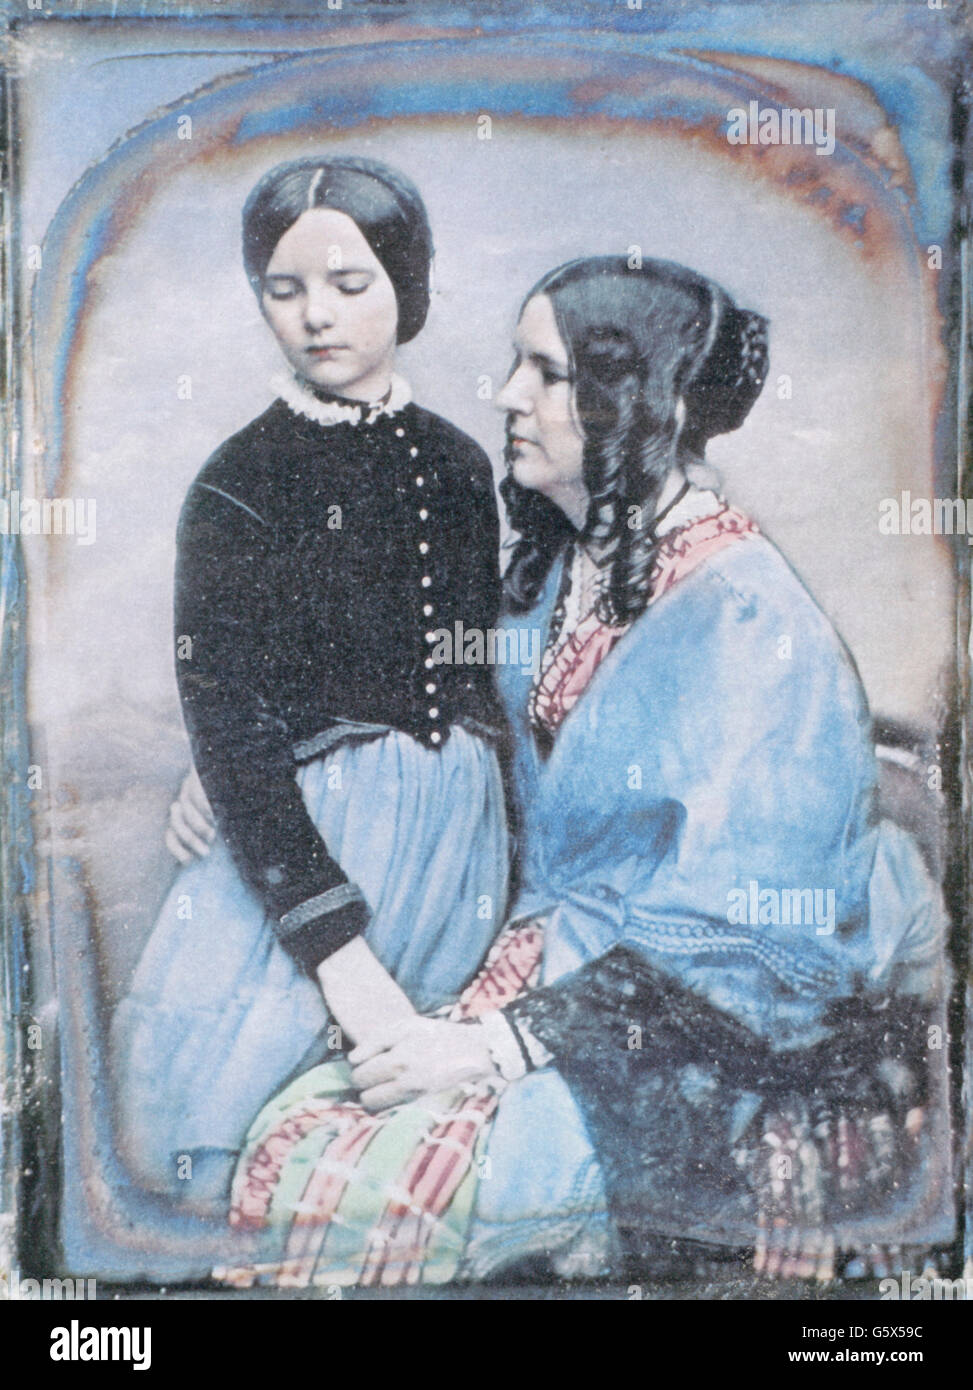 photography, daguerreotype, mother and daughter, by William Edward Kilburn (1818 - 1891), circa 1846, Additional-Rights-Clearences-Not Available Stock Photo